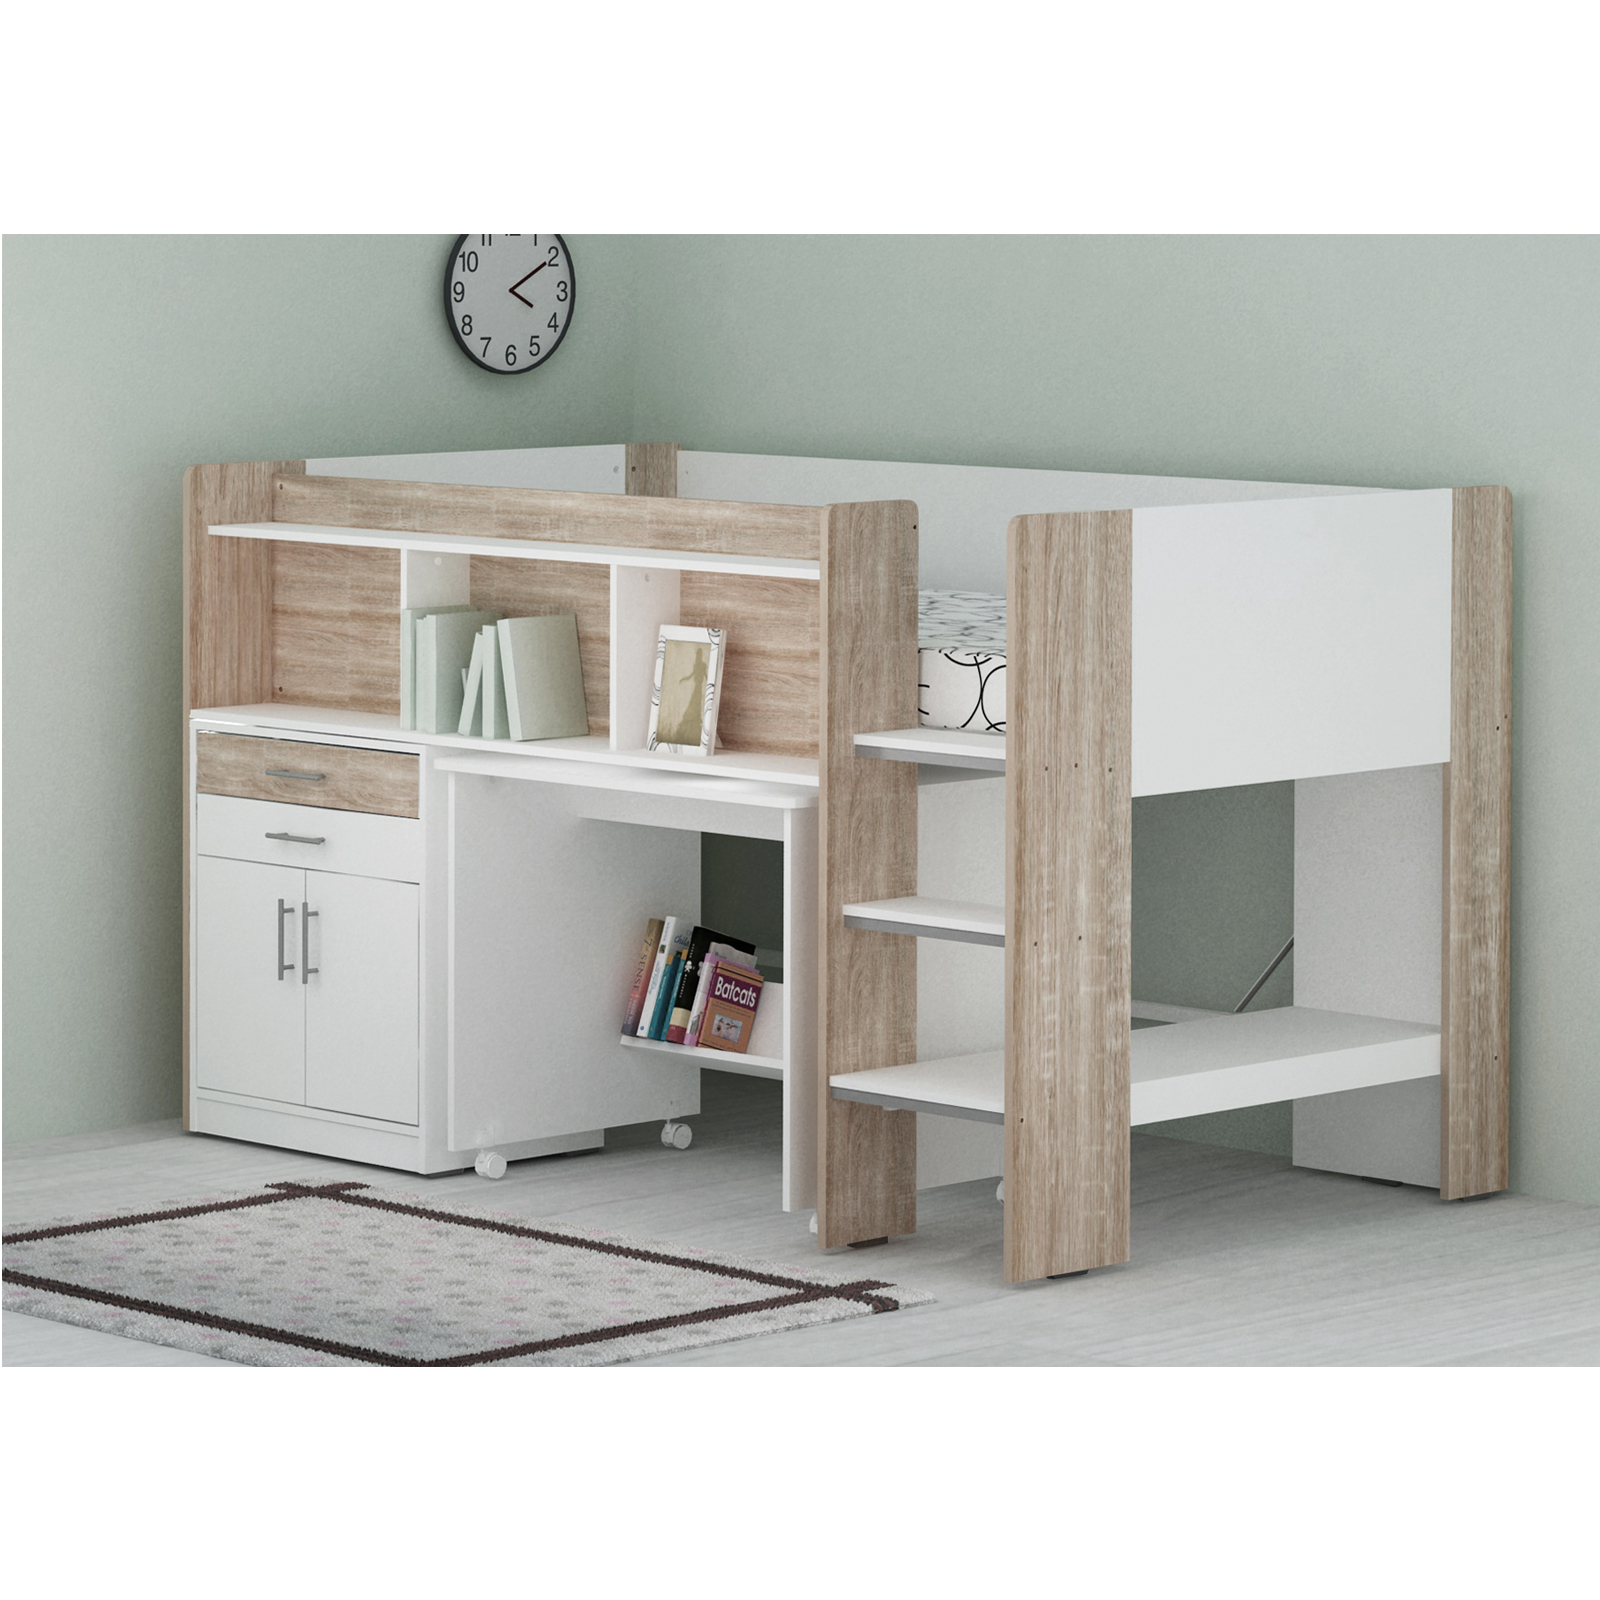 Single Midi Sleeper Bed With Desk Cabinet And Bookshelves Sonoma